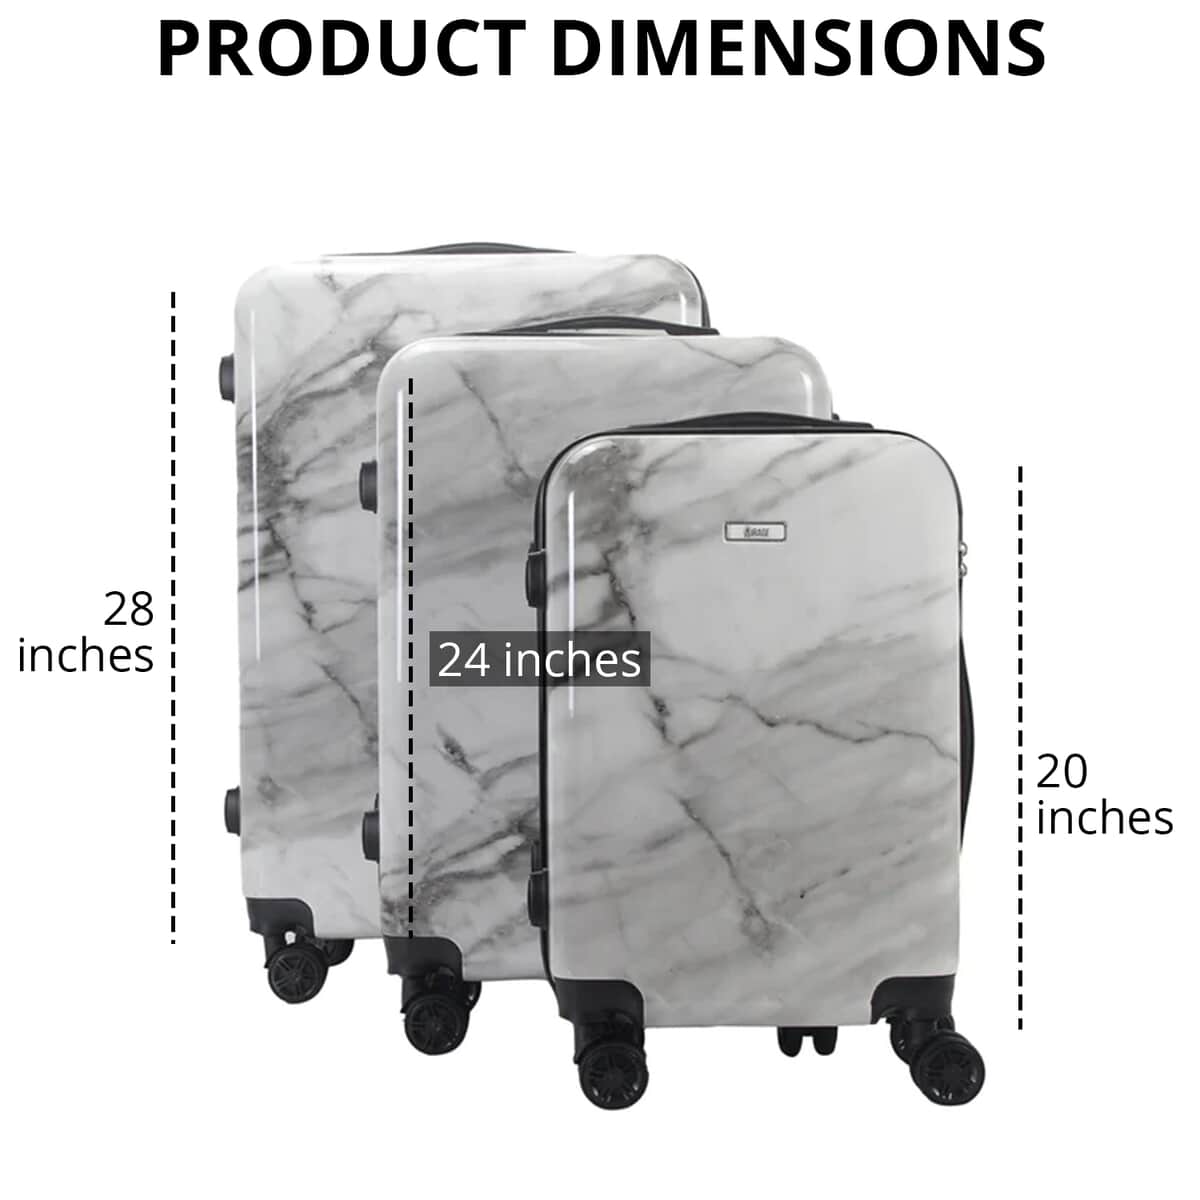 Mirage-Tanya 3 Piece White Marble Luggage Set with 360 Dual Spinning Wheels and Combo Lock image number 3